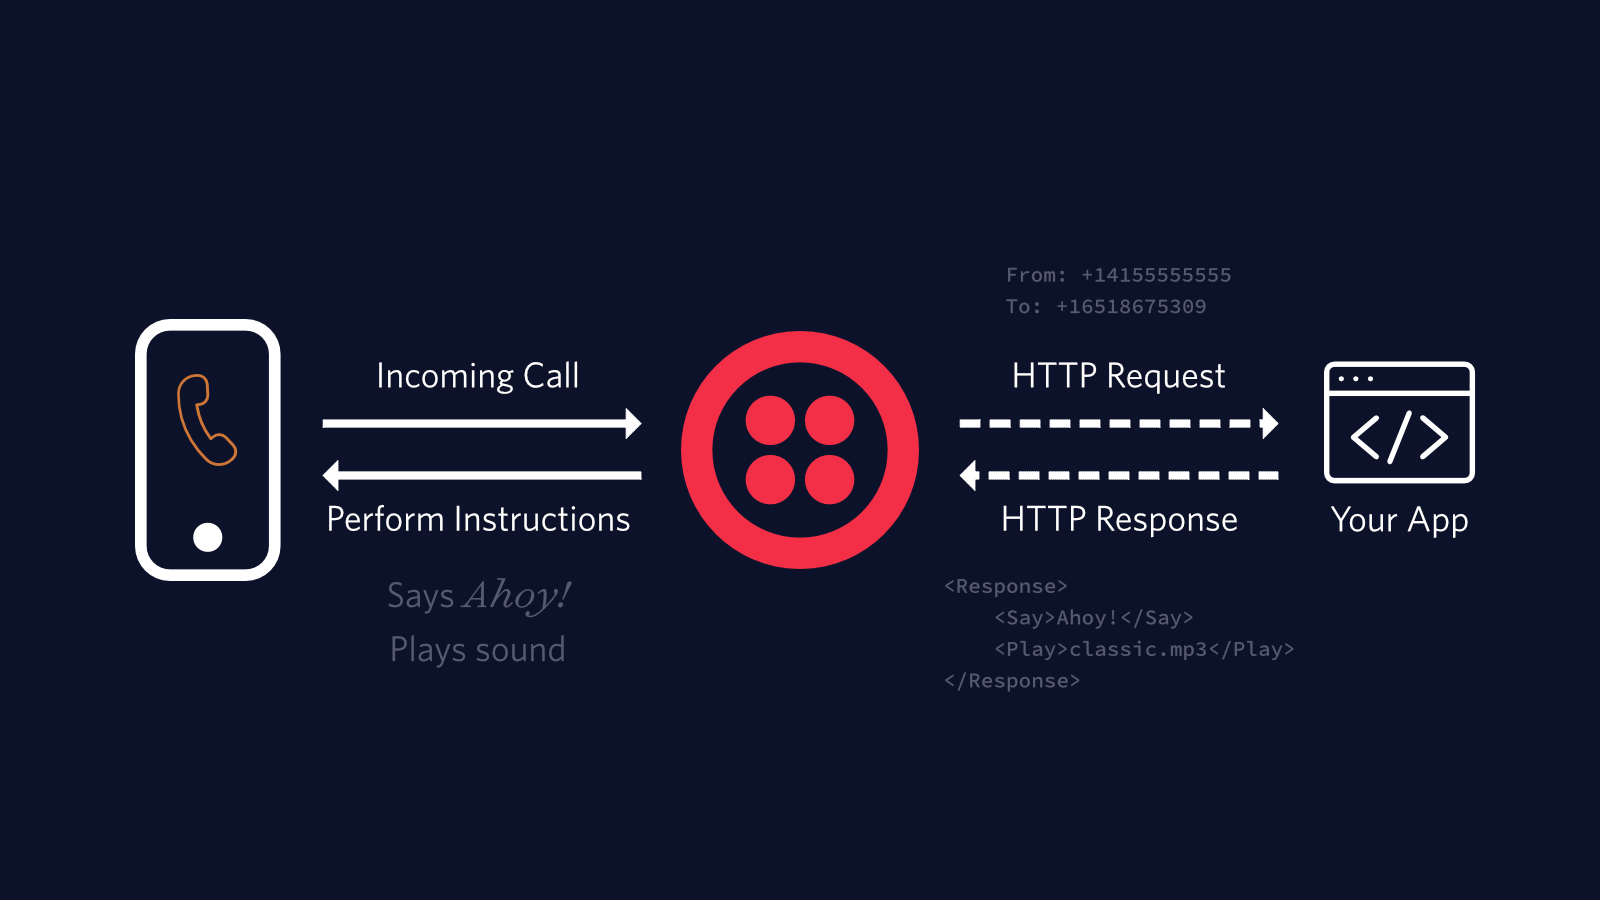 Schematic of a phone call being answered by Twilio, and Twilio making an HTTP request to "your app".  The TwiML returned by "your app" tells Twilio to say "Ahoy!" and play a sound (of Rick Astley)